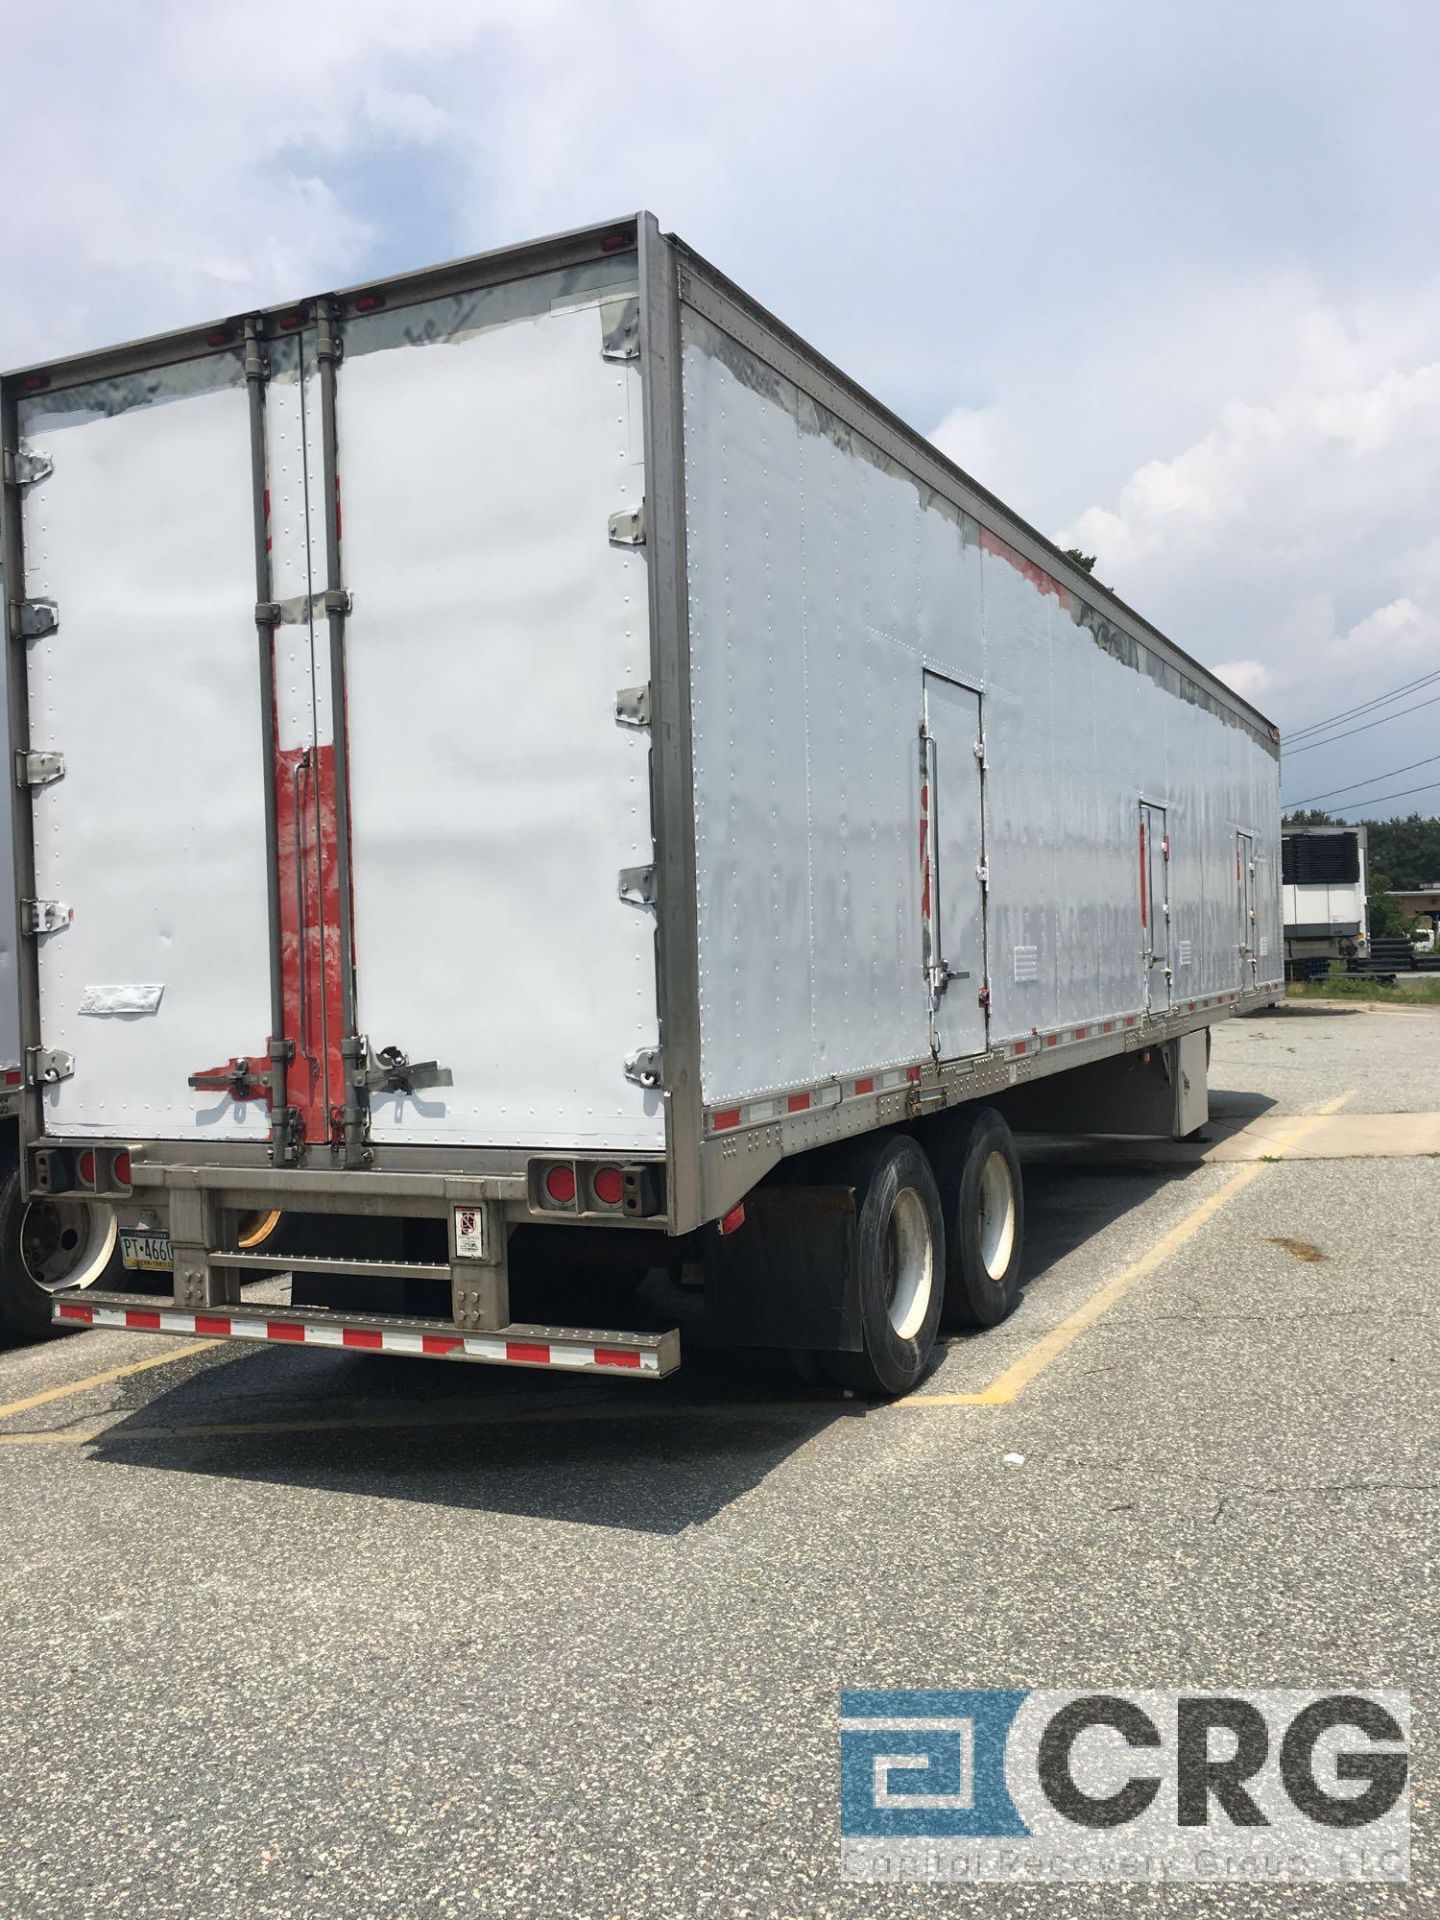 2009 Great Dane Multi Temp Refrigerated Semi Trailer - 45 Long, 102" wide, Carrier Vector 1800MT - Image 6 of 6